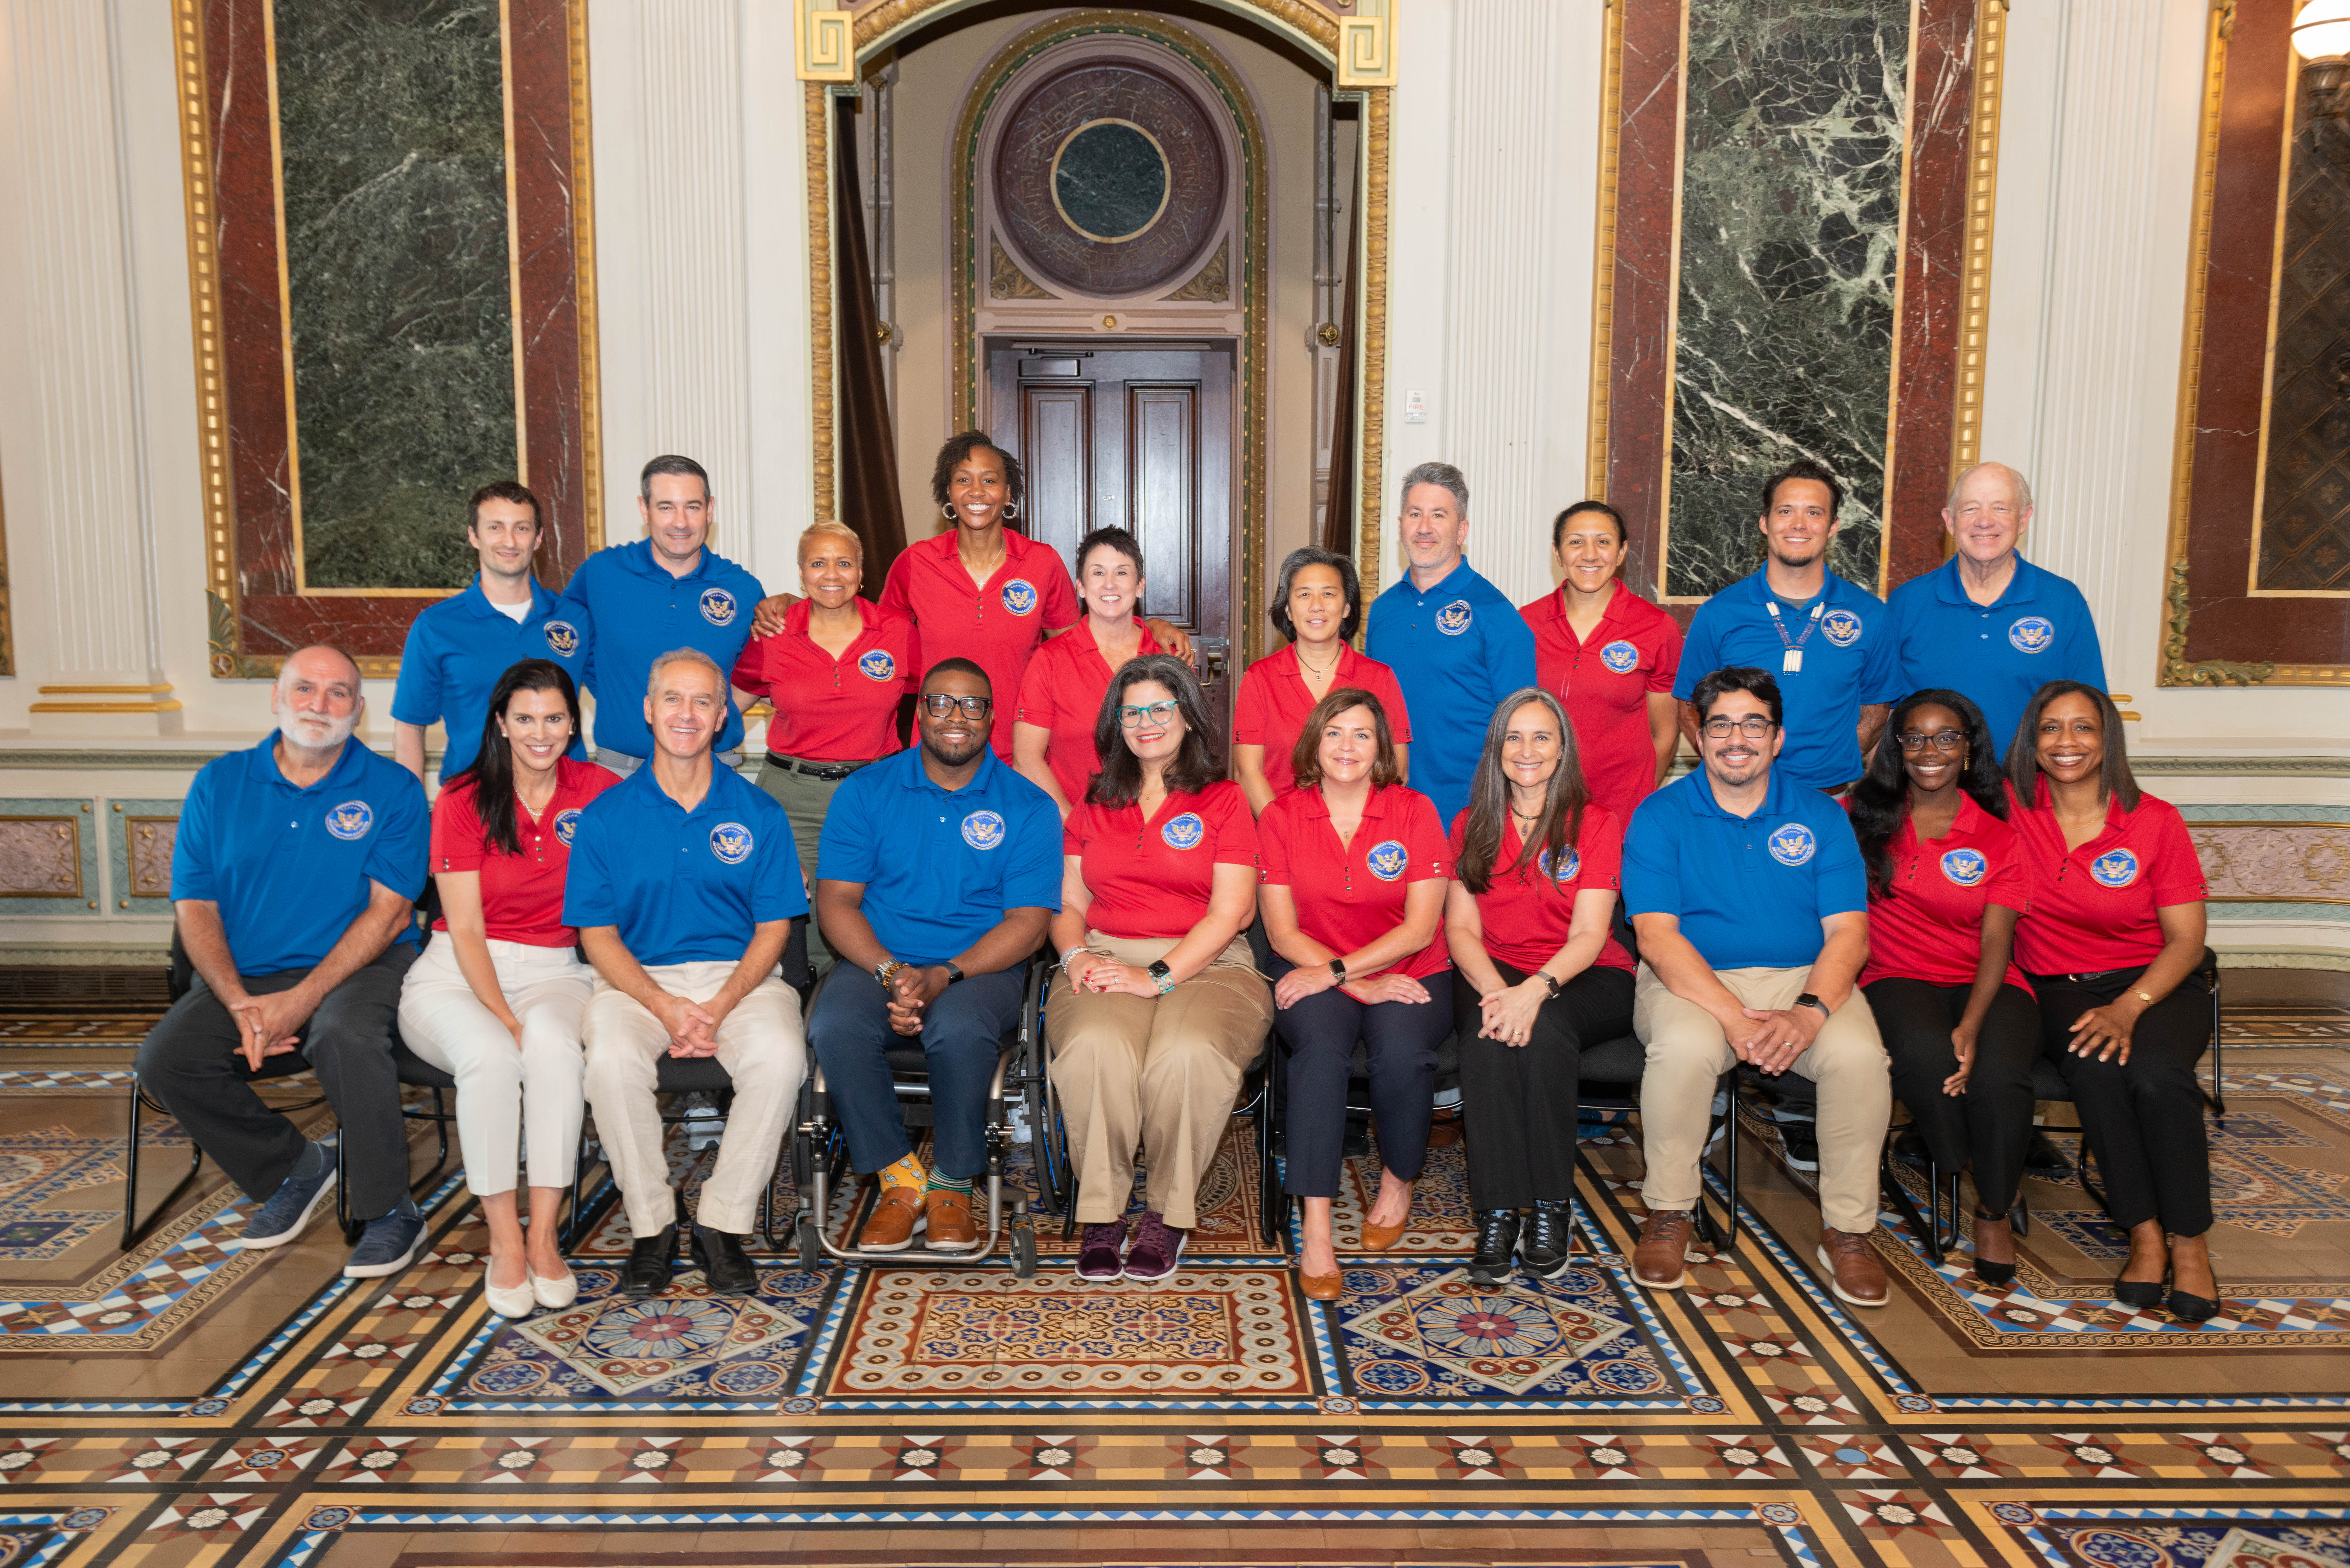 A group photograph of the President's Council on Sports Fitness and Nutrition